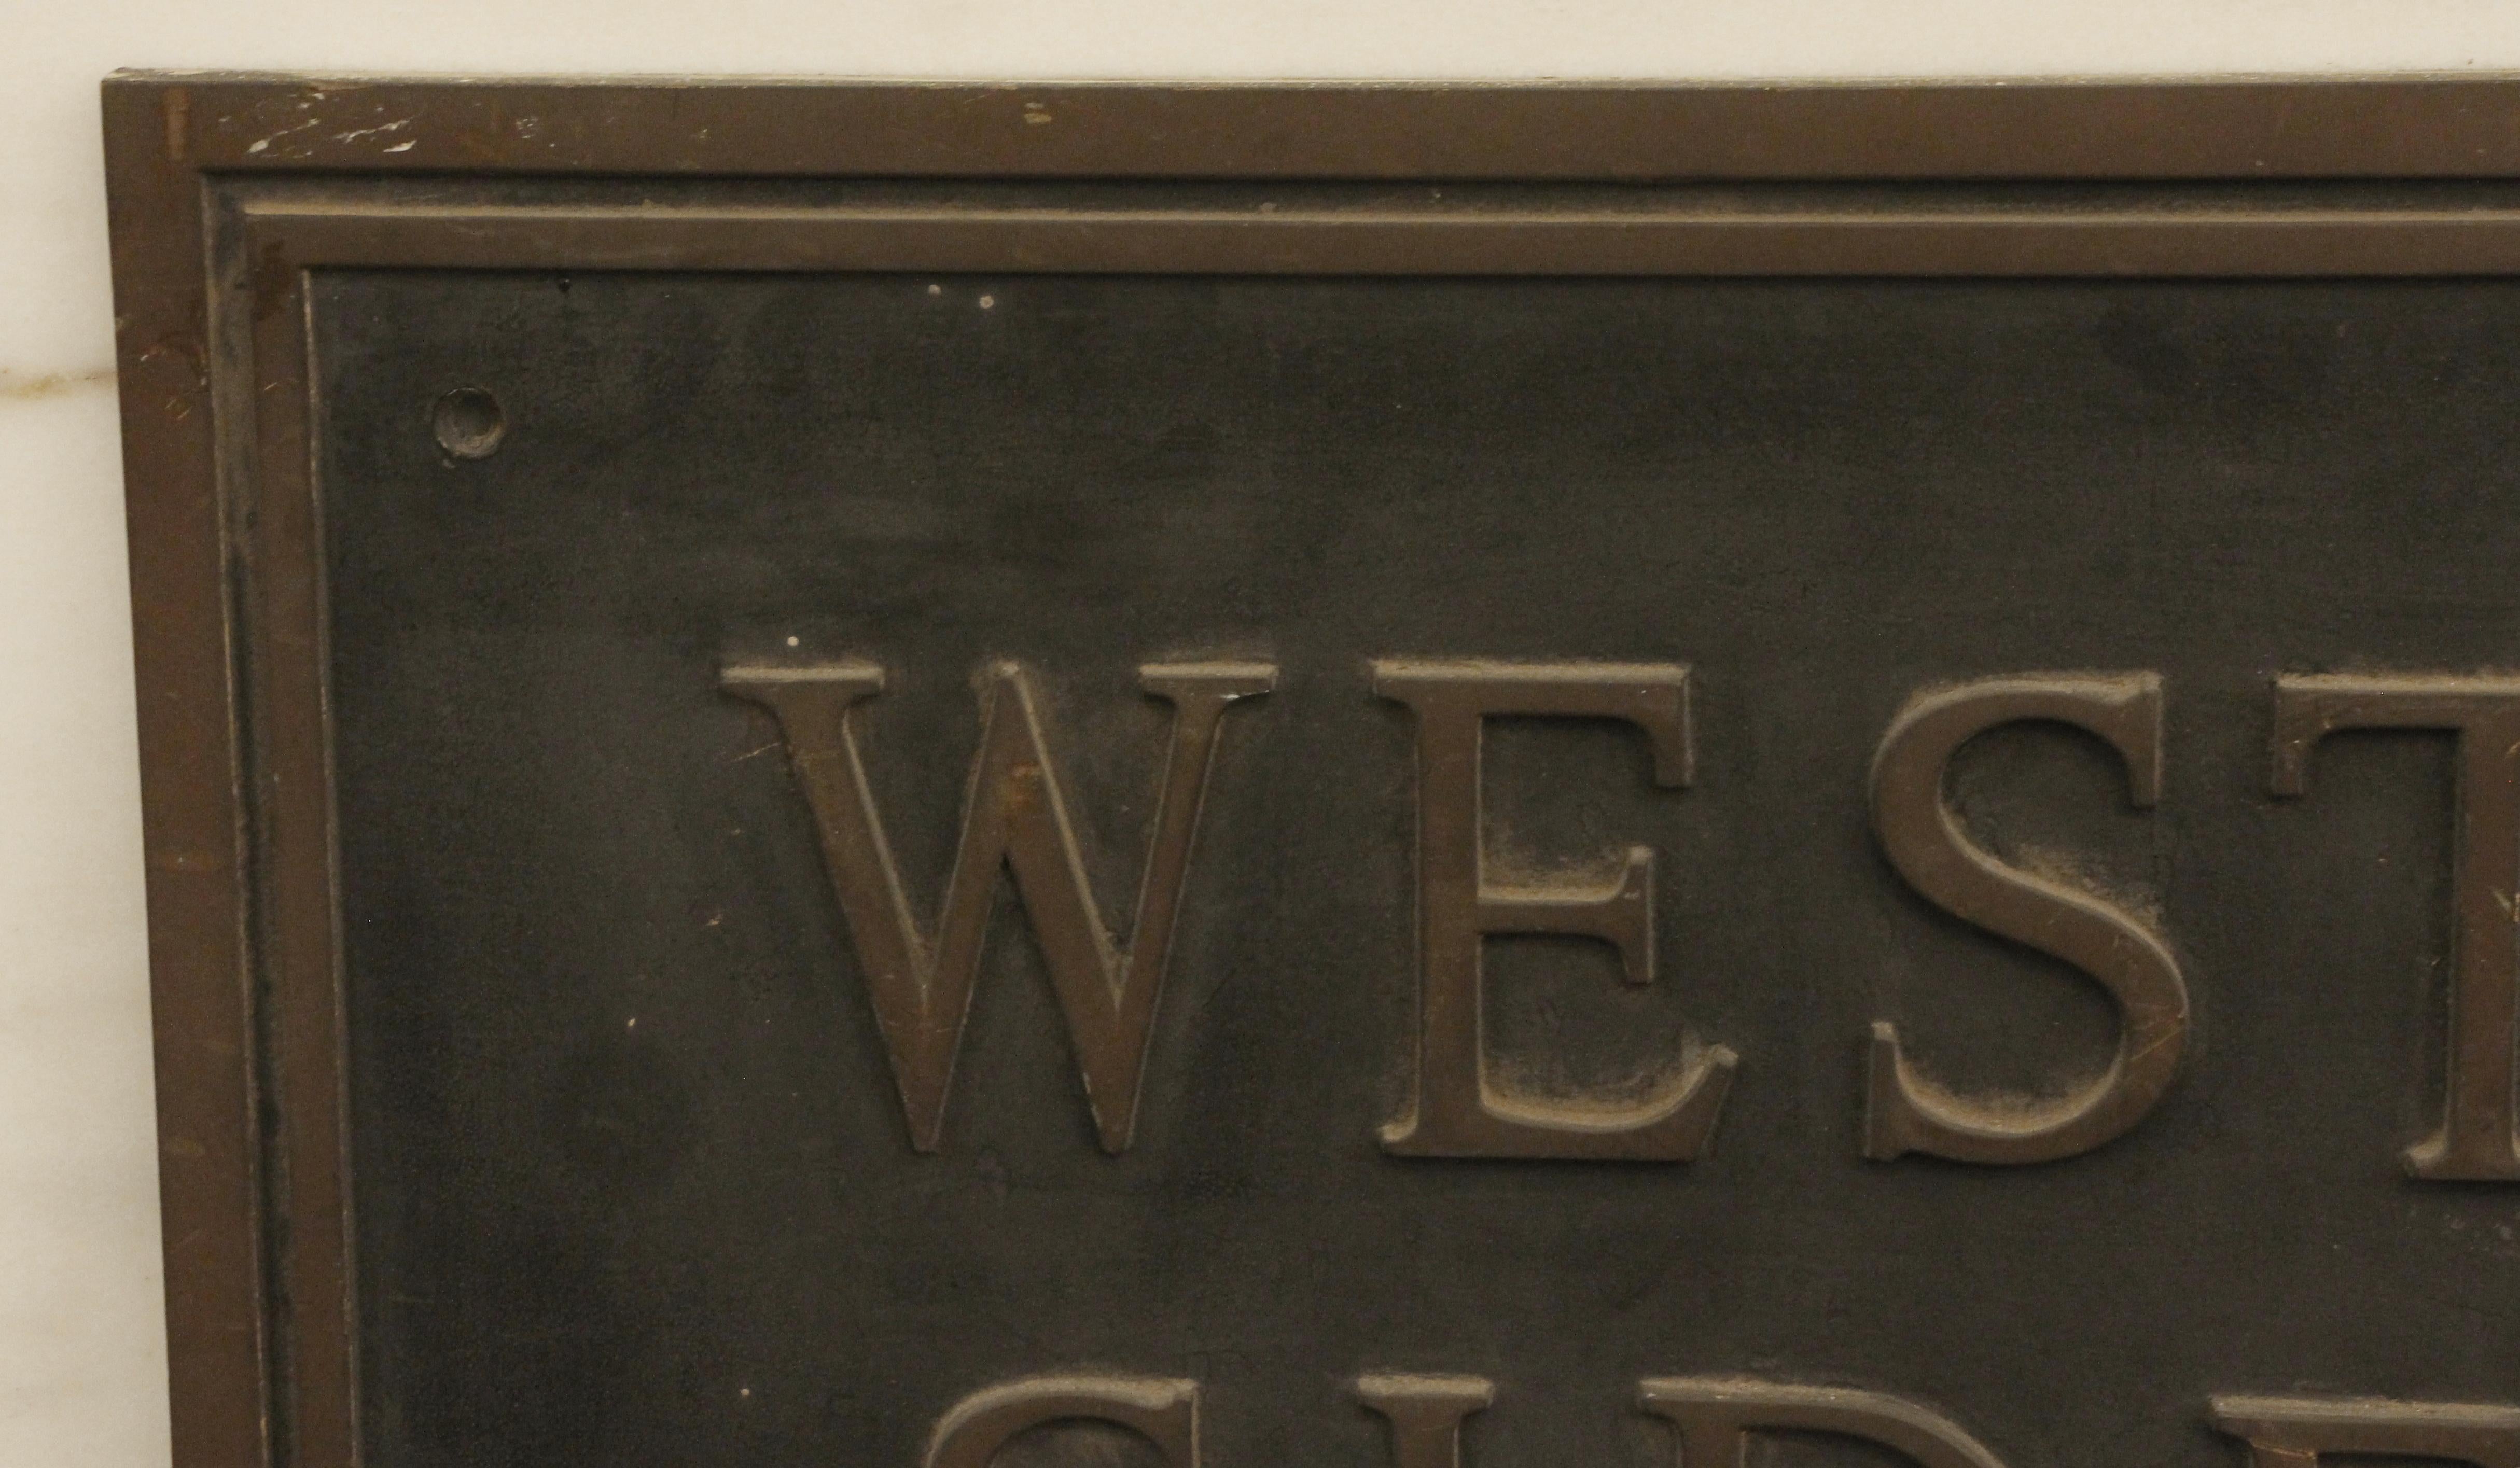 West Side Bank sign made of cast bronze with a black and antique bronze finish. from the 1980s. This can be seen at our 302 Bowery location in NoHo in Manhattan.